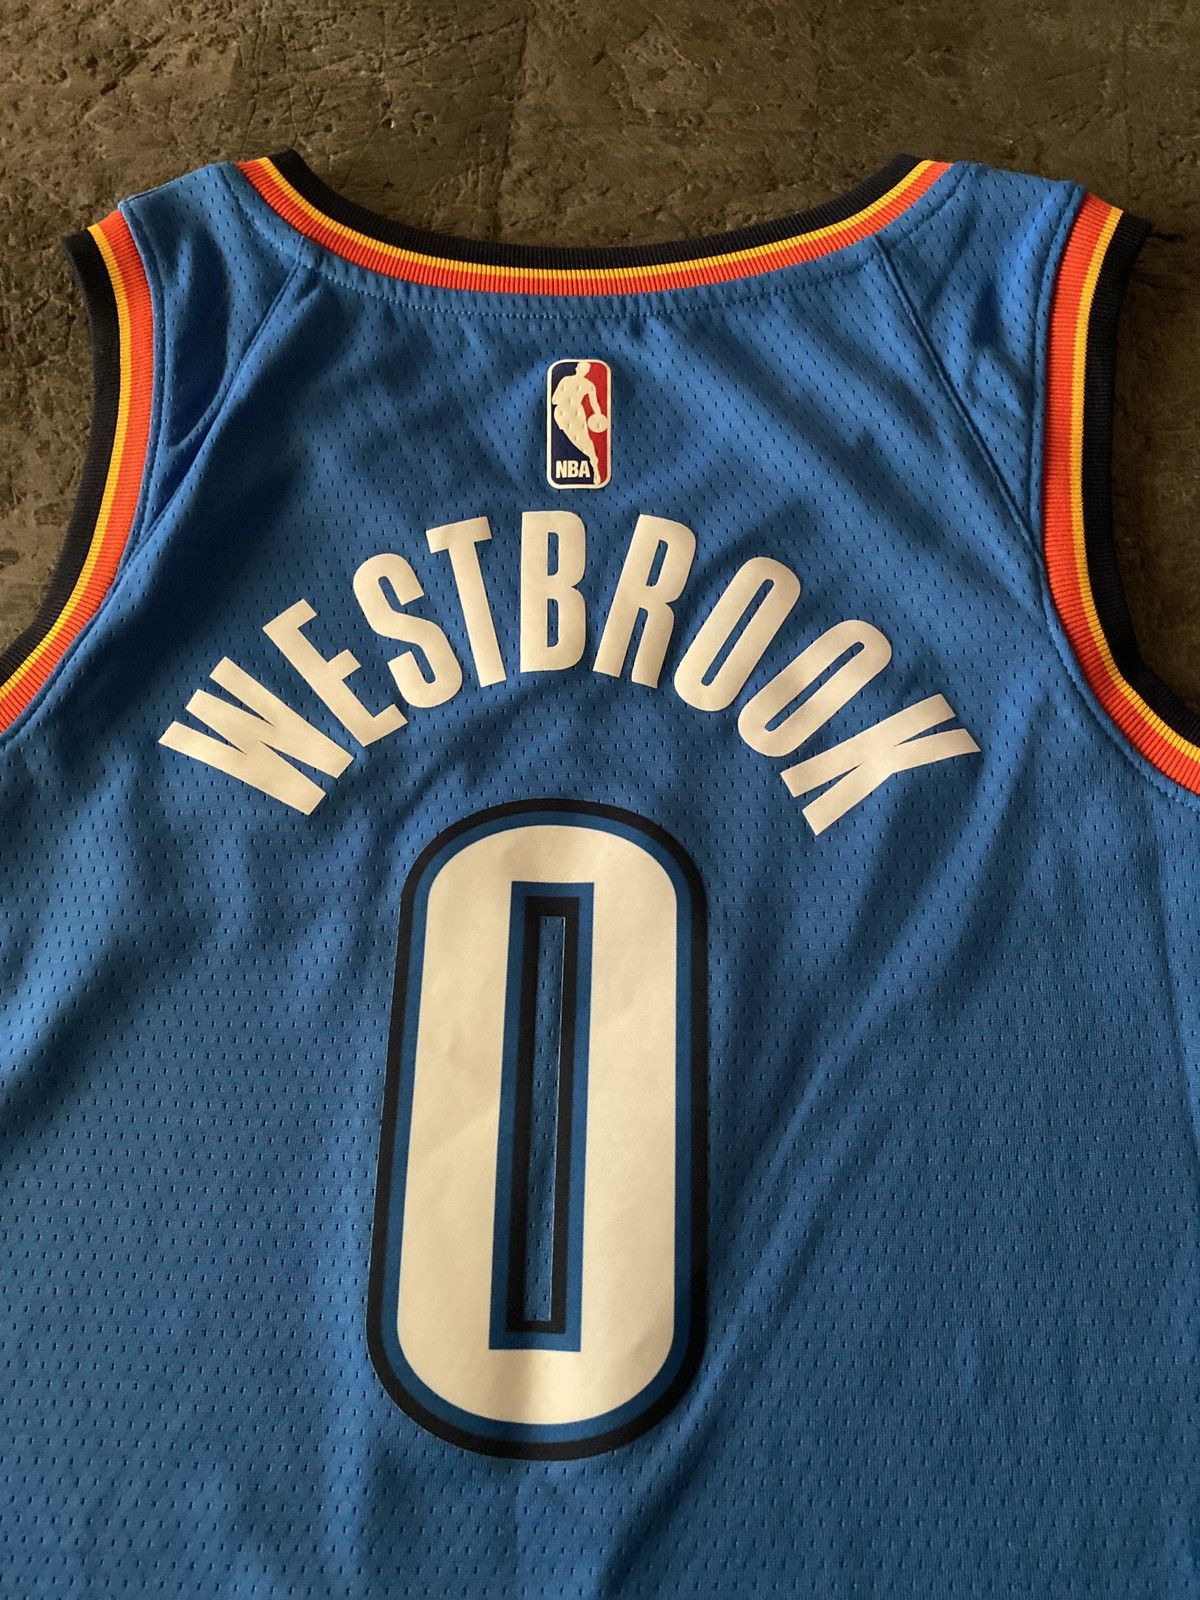 Nike Nike OKC Russell Westbrook Jersey Size US S / EU 44-46 / 1 - 2 Preview